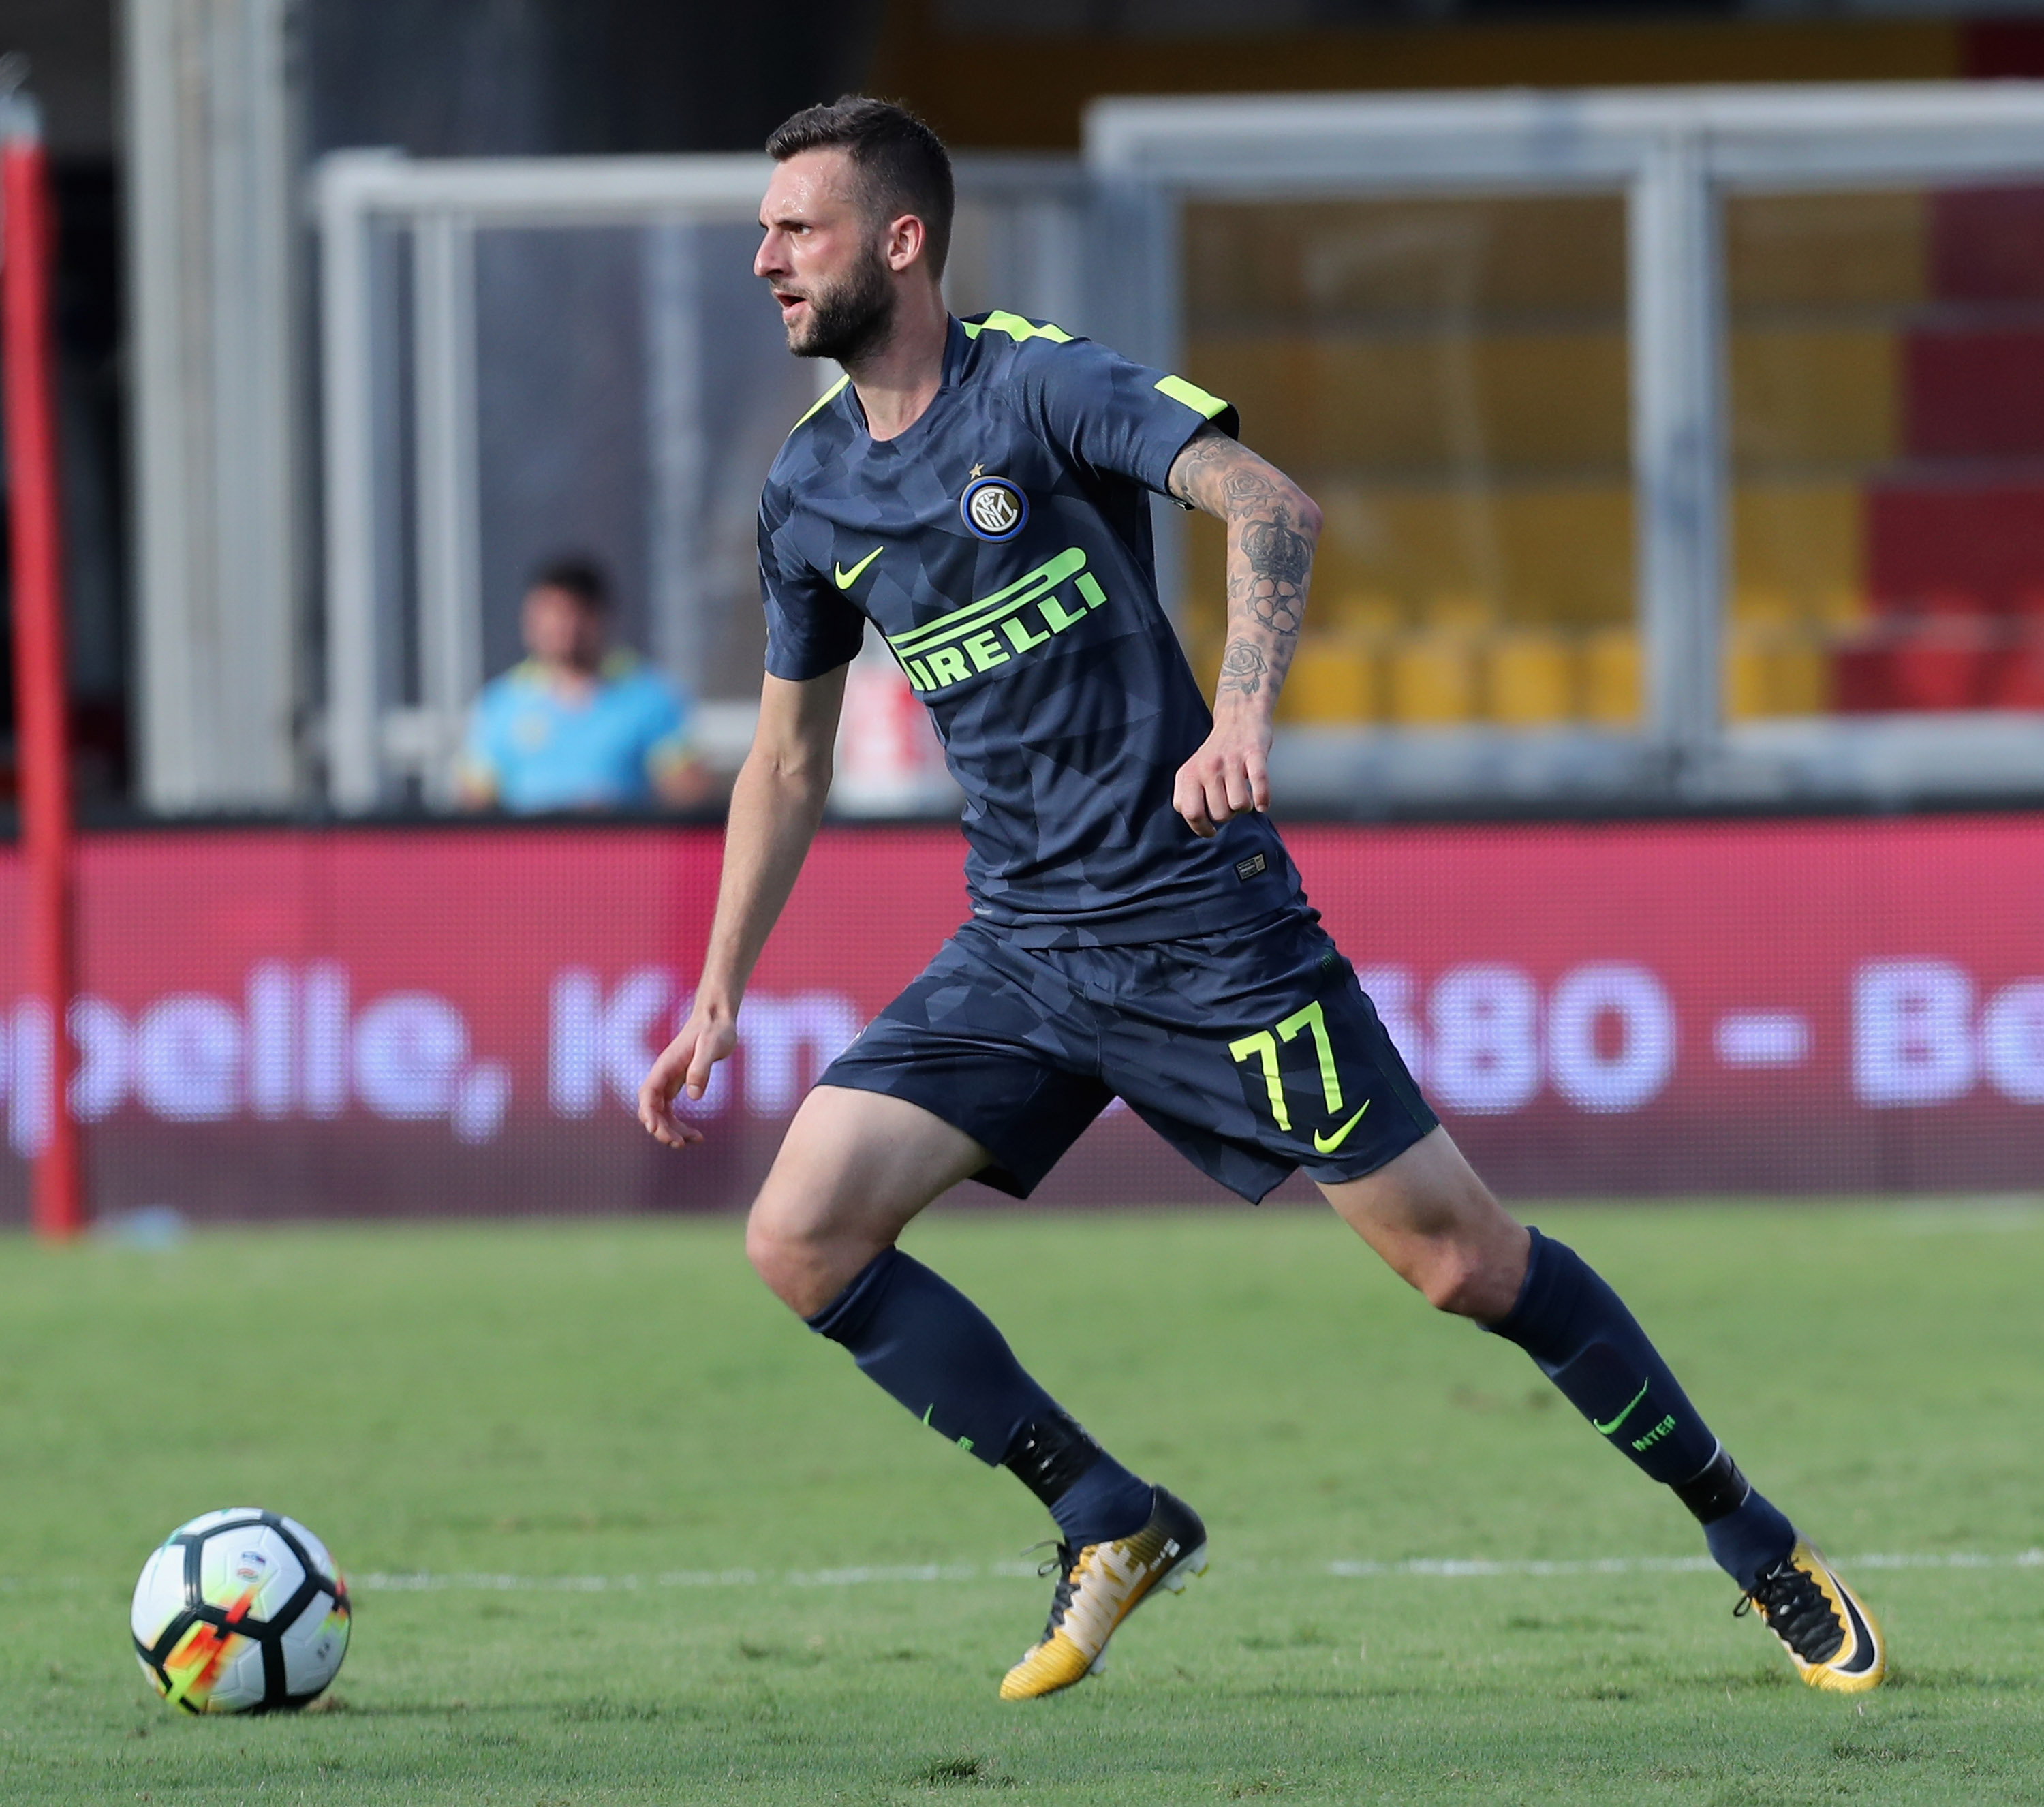 BENEVENTO, ITALY - OCTOBER 01:  Marcelo Brozovic of Inter during the Serie A match between Benevento Calcio and FC Internazionale at Stadio Ciro Vigorito on October 1, 2017 in Benevento, Italy.  (Photo by Maurizio Lagana/Getty Images)